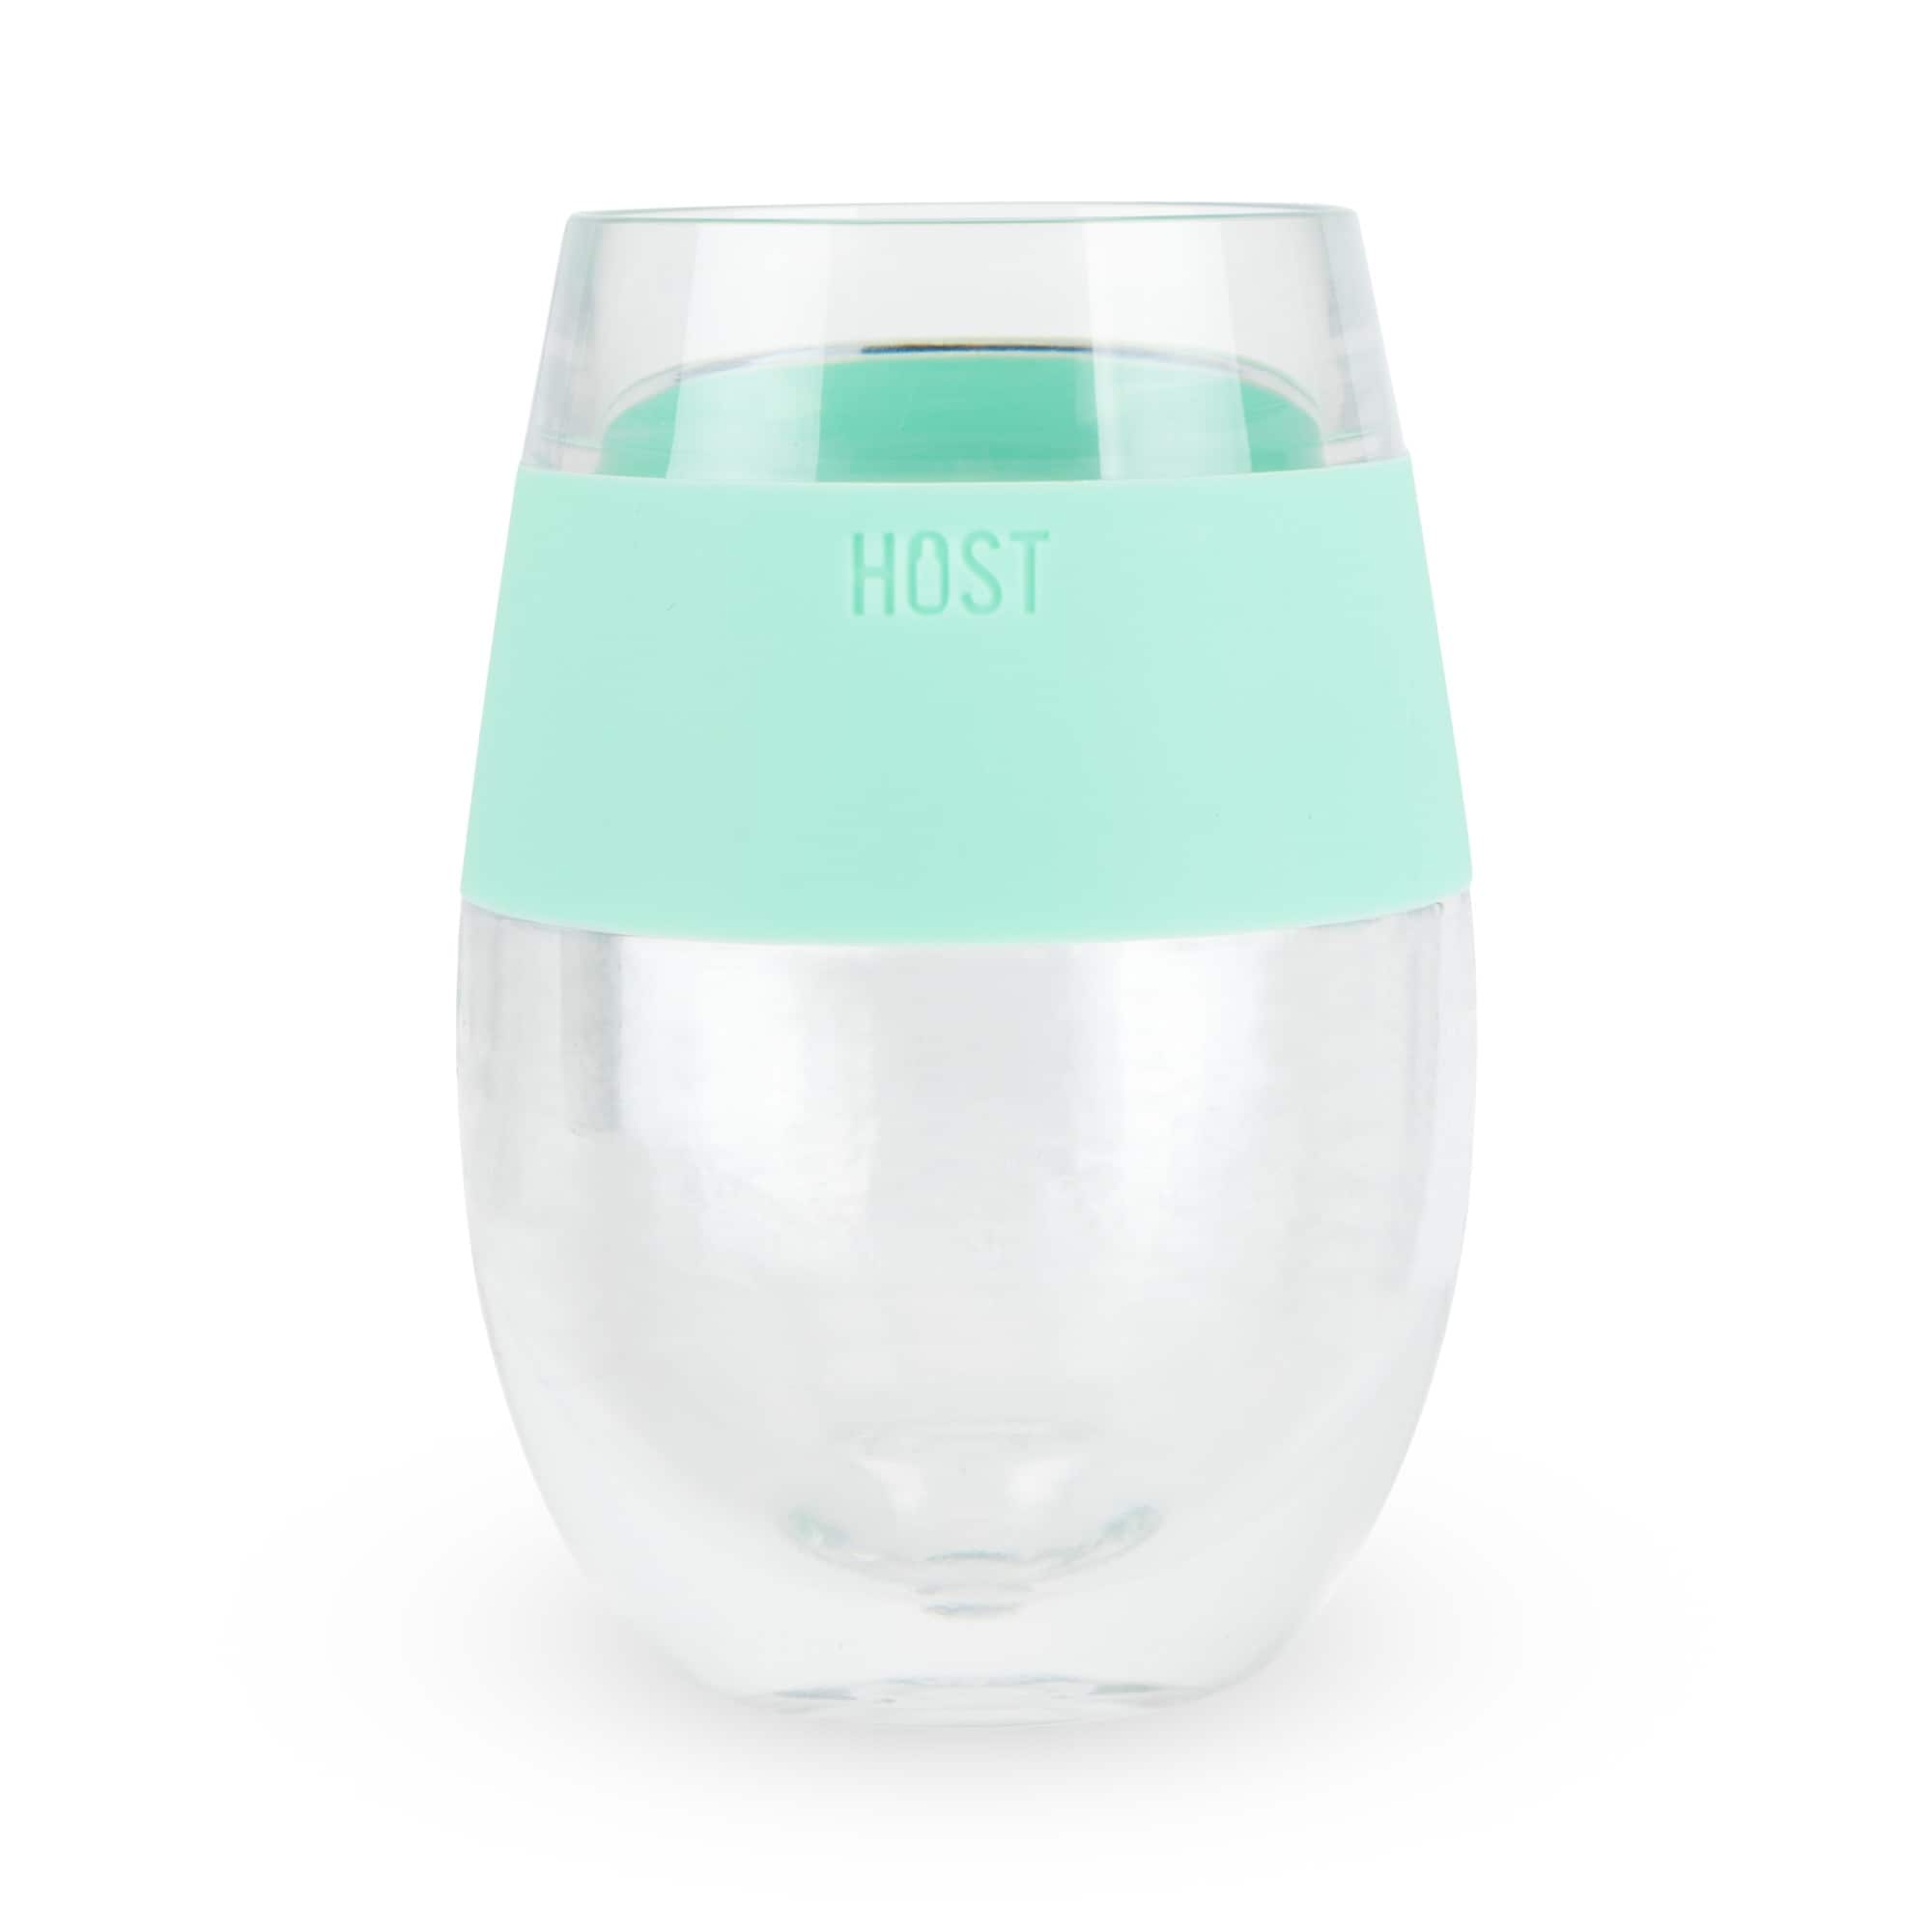 https://ak1.ostkcdn.com/images/products/is/images/direct/aa1be804a7f7f7ede09af8dca5b4e30931ff0a98/Wine-FREEZE-Cooling-Cup-in-Mint-%281-pack%29-by-HOST.jpg